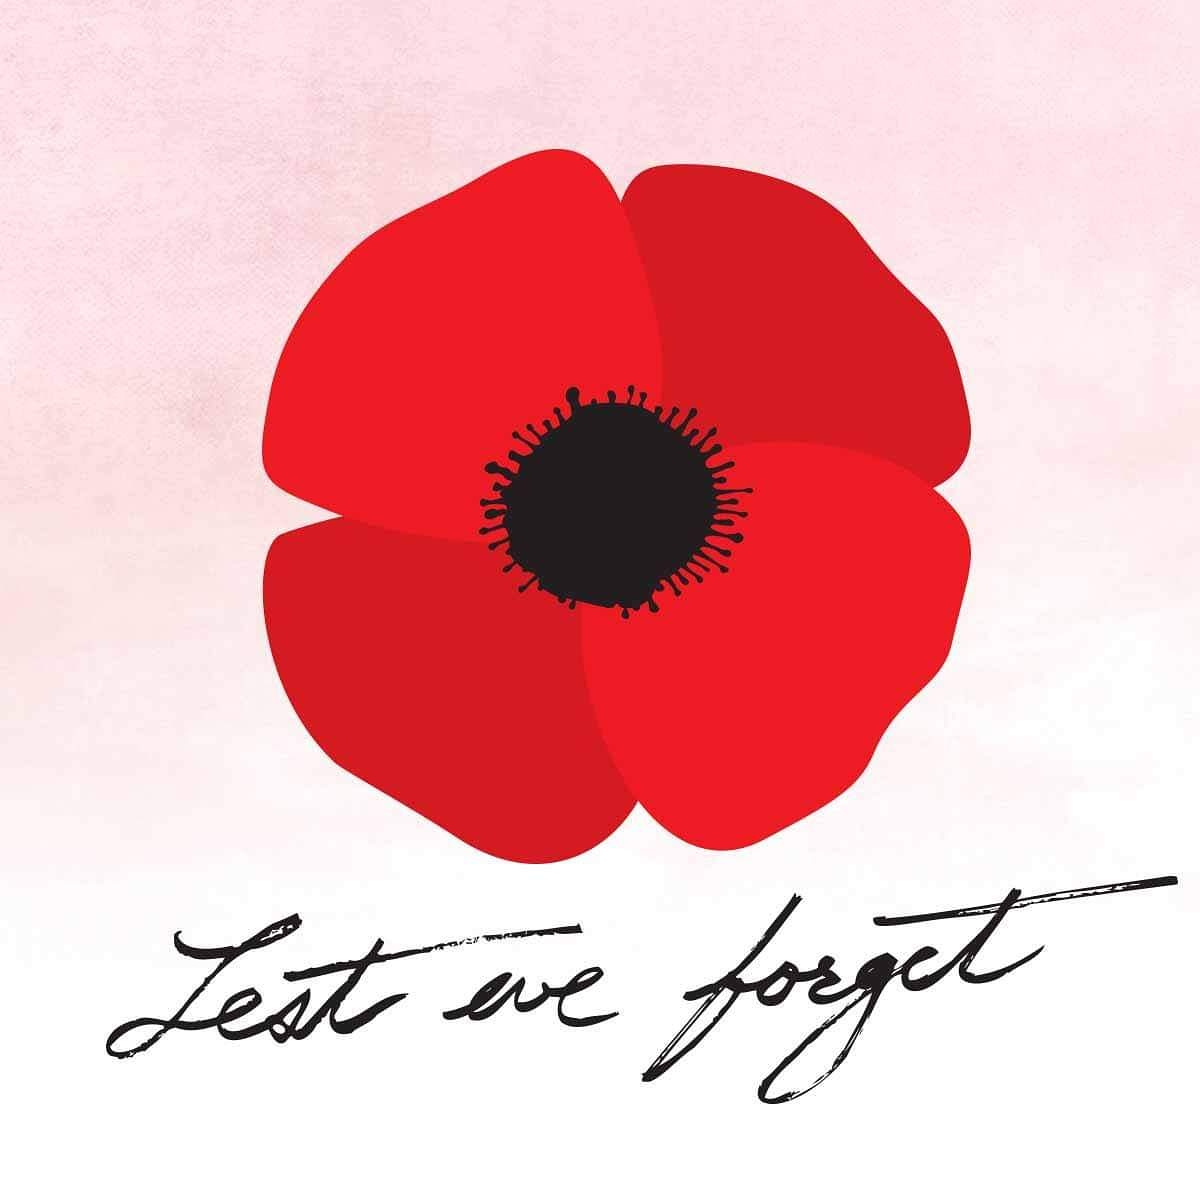 Today we honour all of those who have served. Thank you for your sacrifice. #LestWeForget Open today from 10am - 6pm #BosleysOakBay #LocallyOwnedandOperated #SmallBusinessYYJ